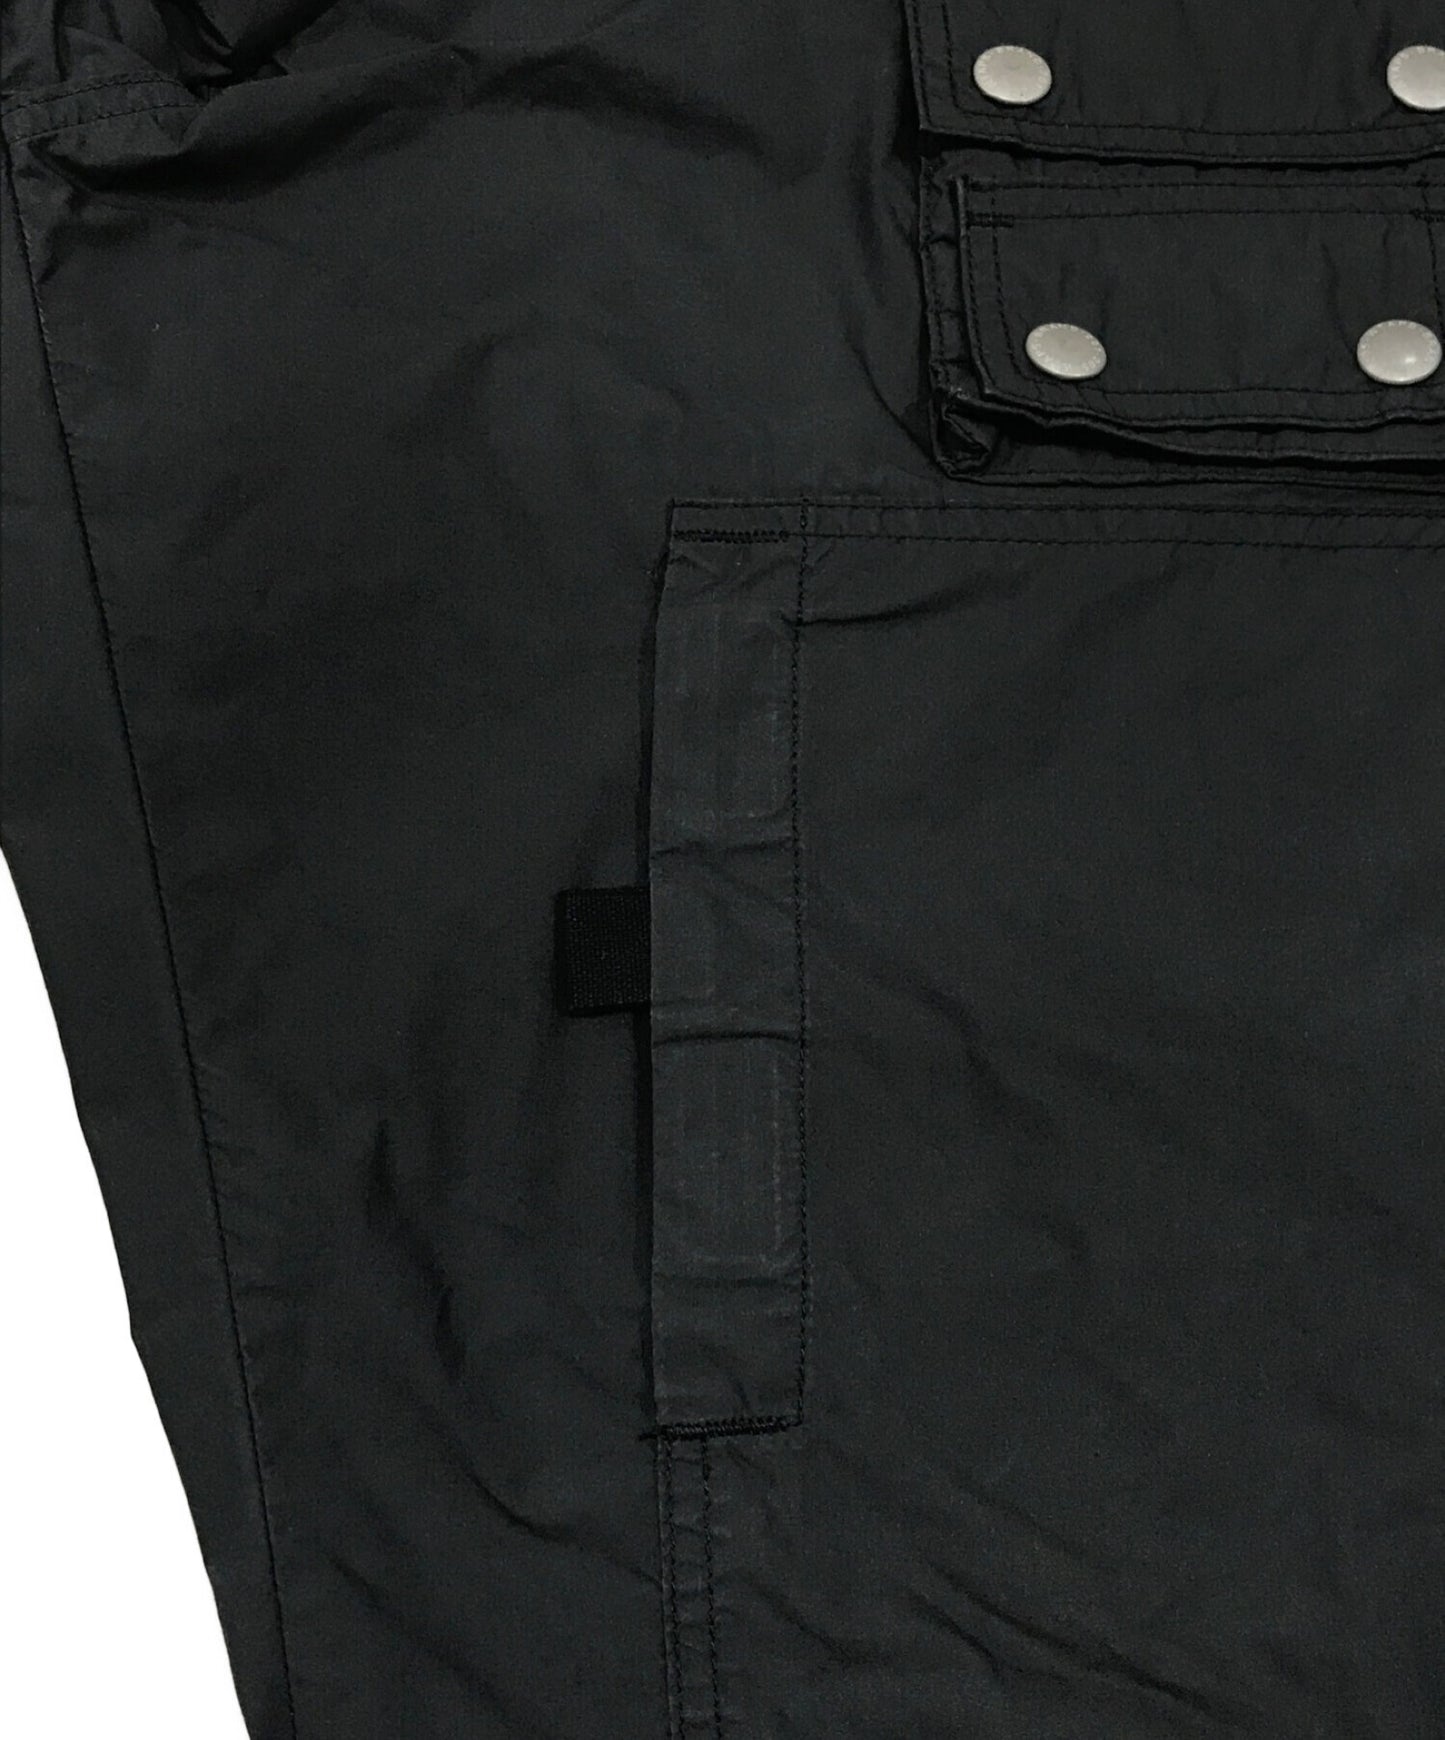 [Pre-owned] WTAPS MODULAR TROUSERS Modular trousers 201BRDT-PTM03